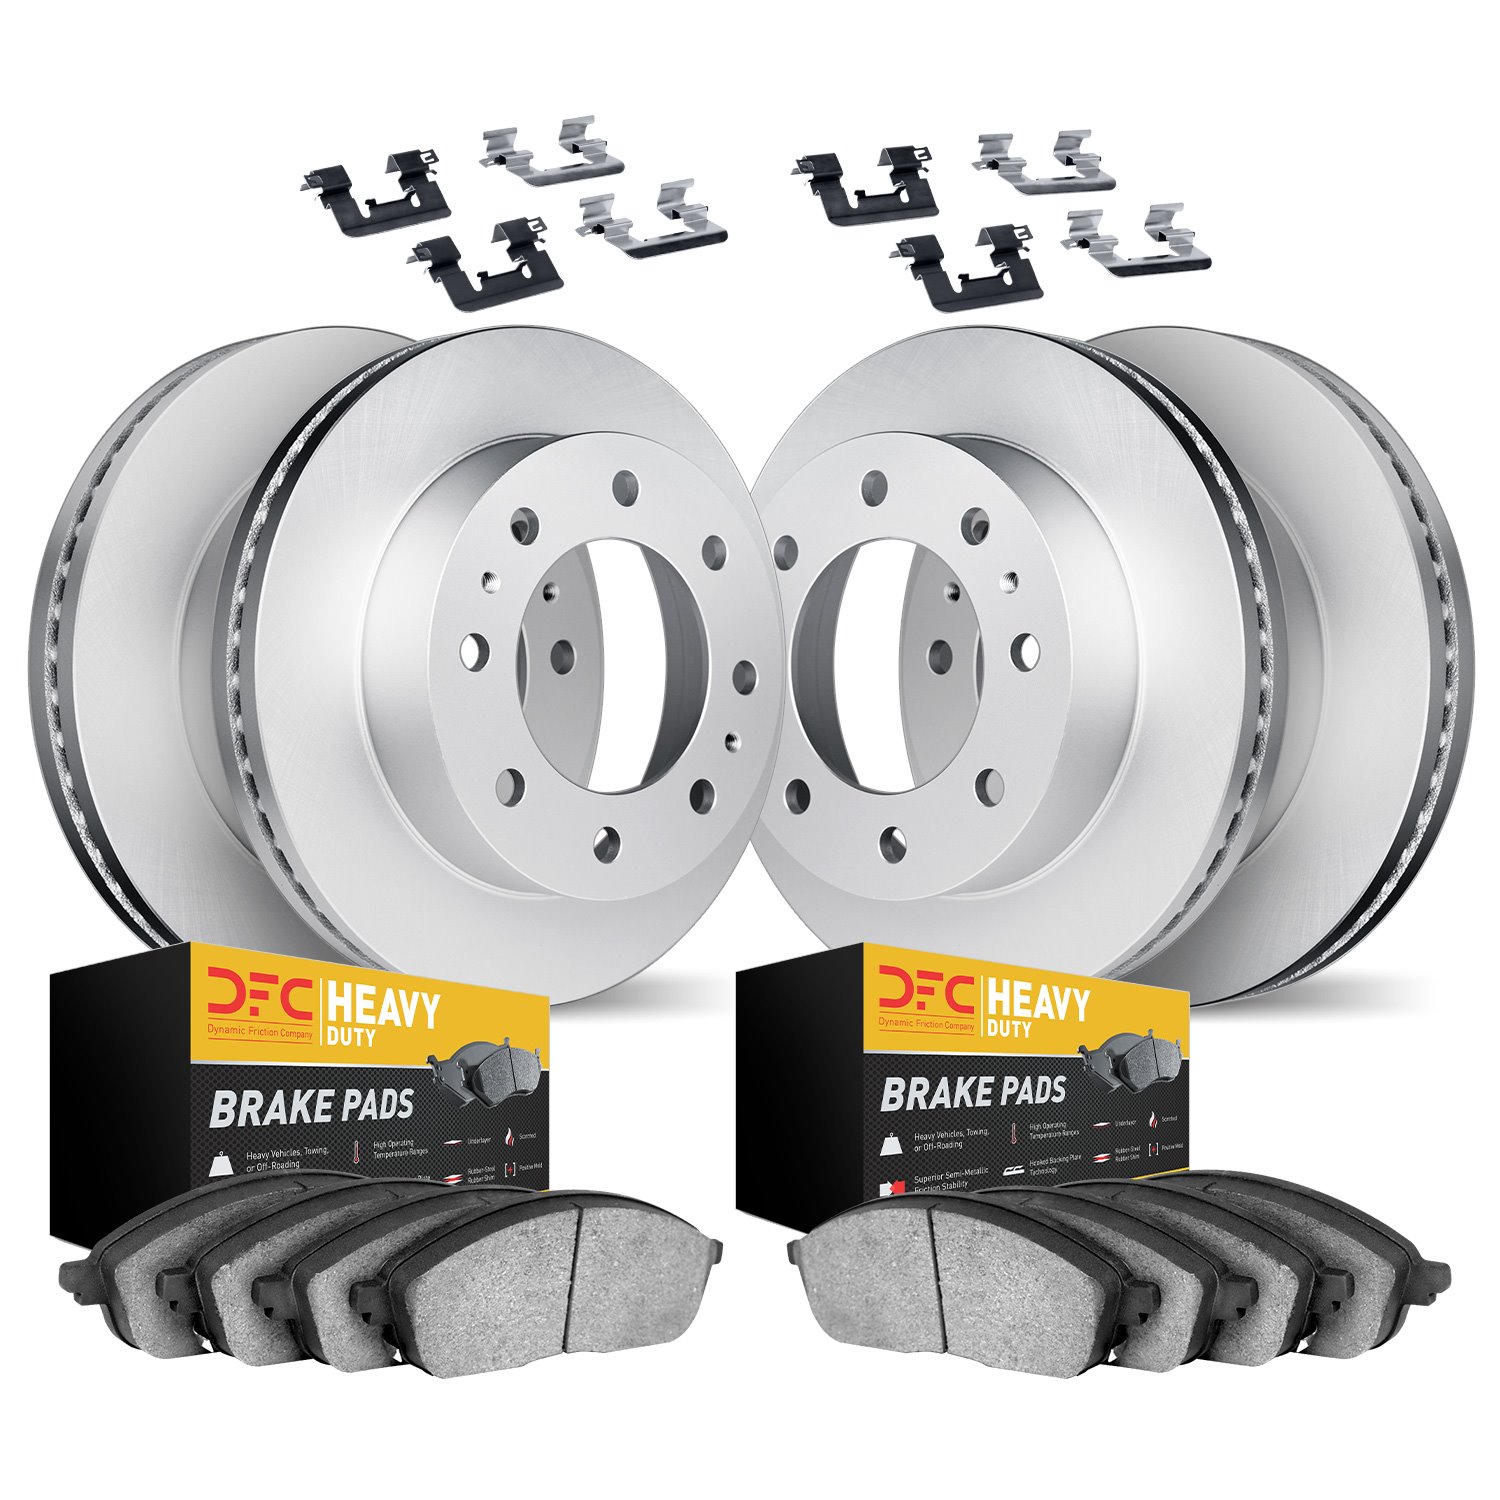 4214-54057 Geospec Brake Rotors w/Heavy-Duty Brake Pads & Hardware, 2006-2010 Ford/Lincoln/Mercury/Mazda, Position: Front and Re